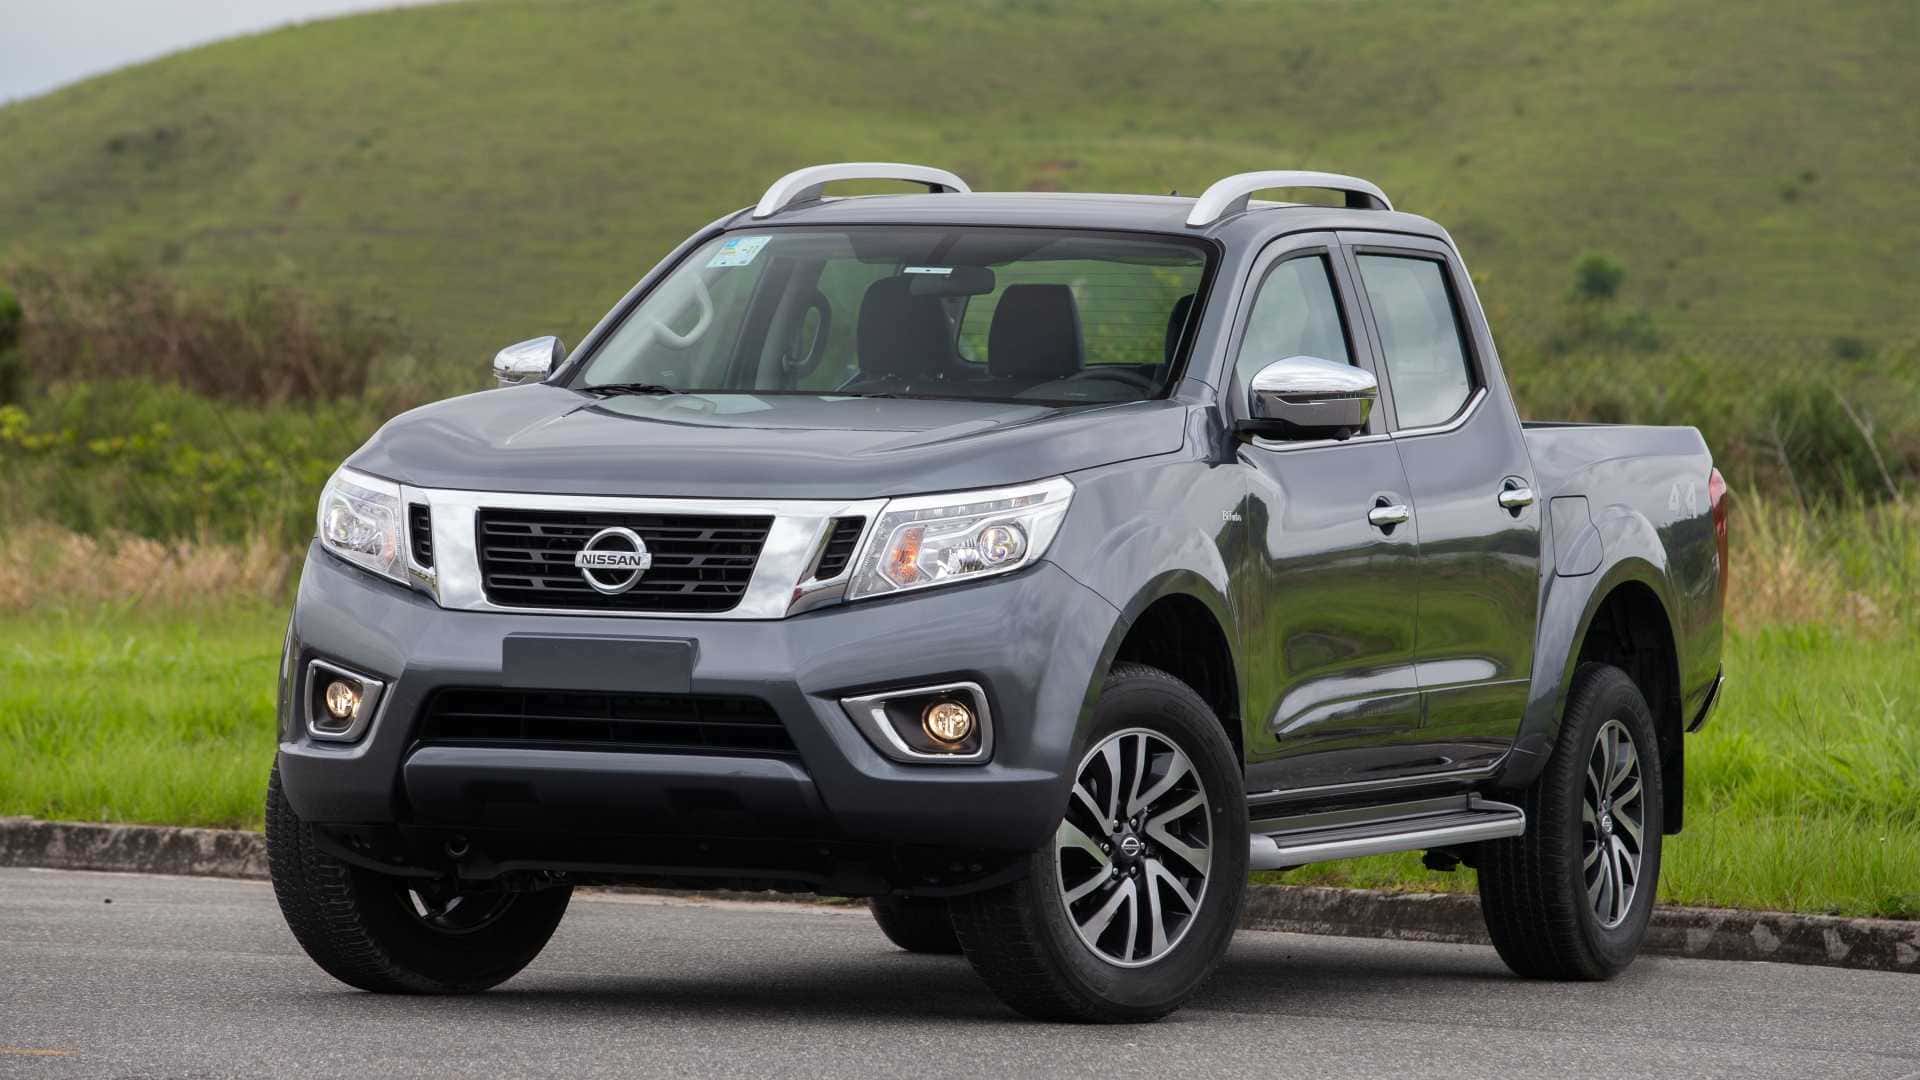 Pick-Up - Nissan - Frontier S - Portal Governo